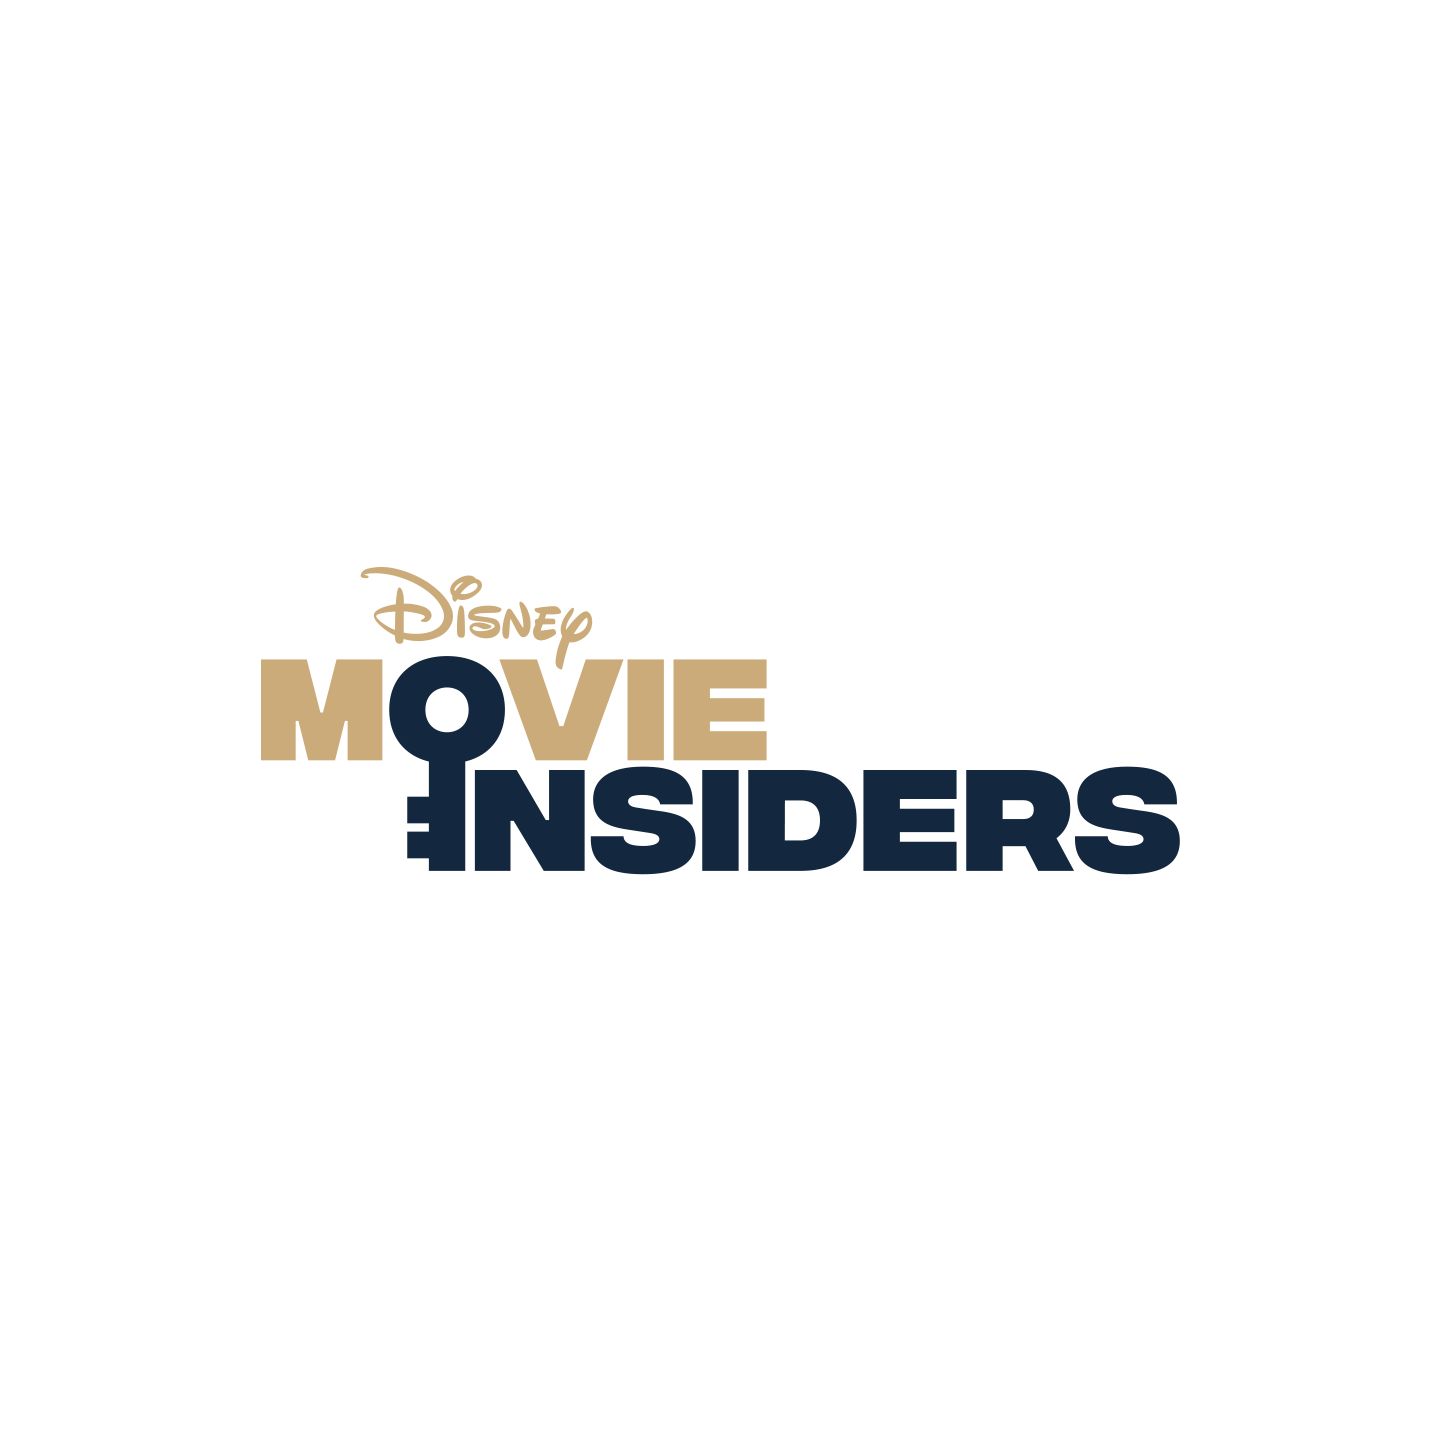 May The Fourth Be With You! Get rewarded for being a Star Wars fan with Disney Movie Insiders.